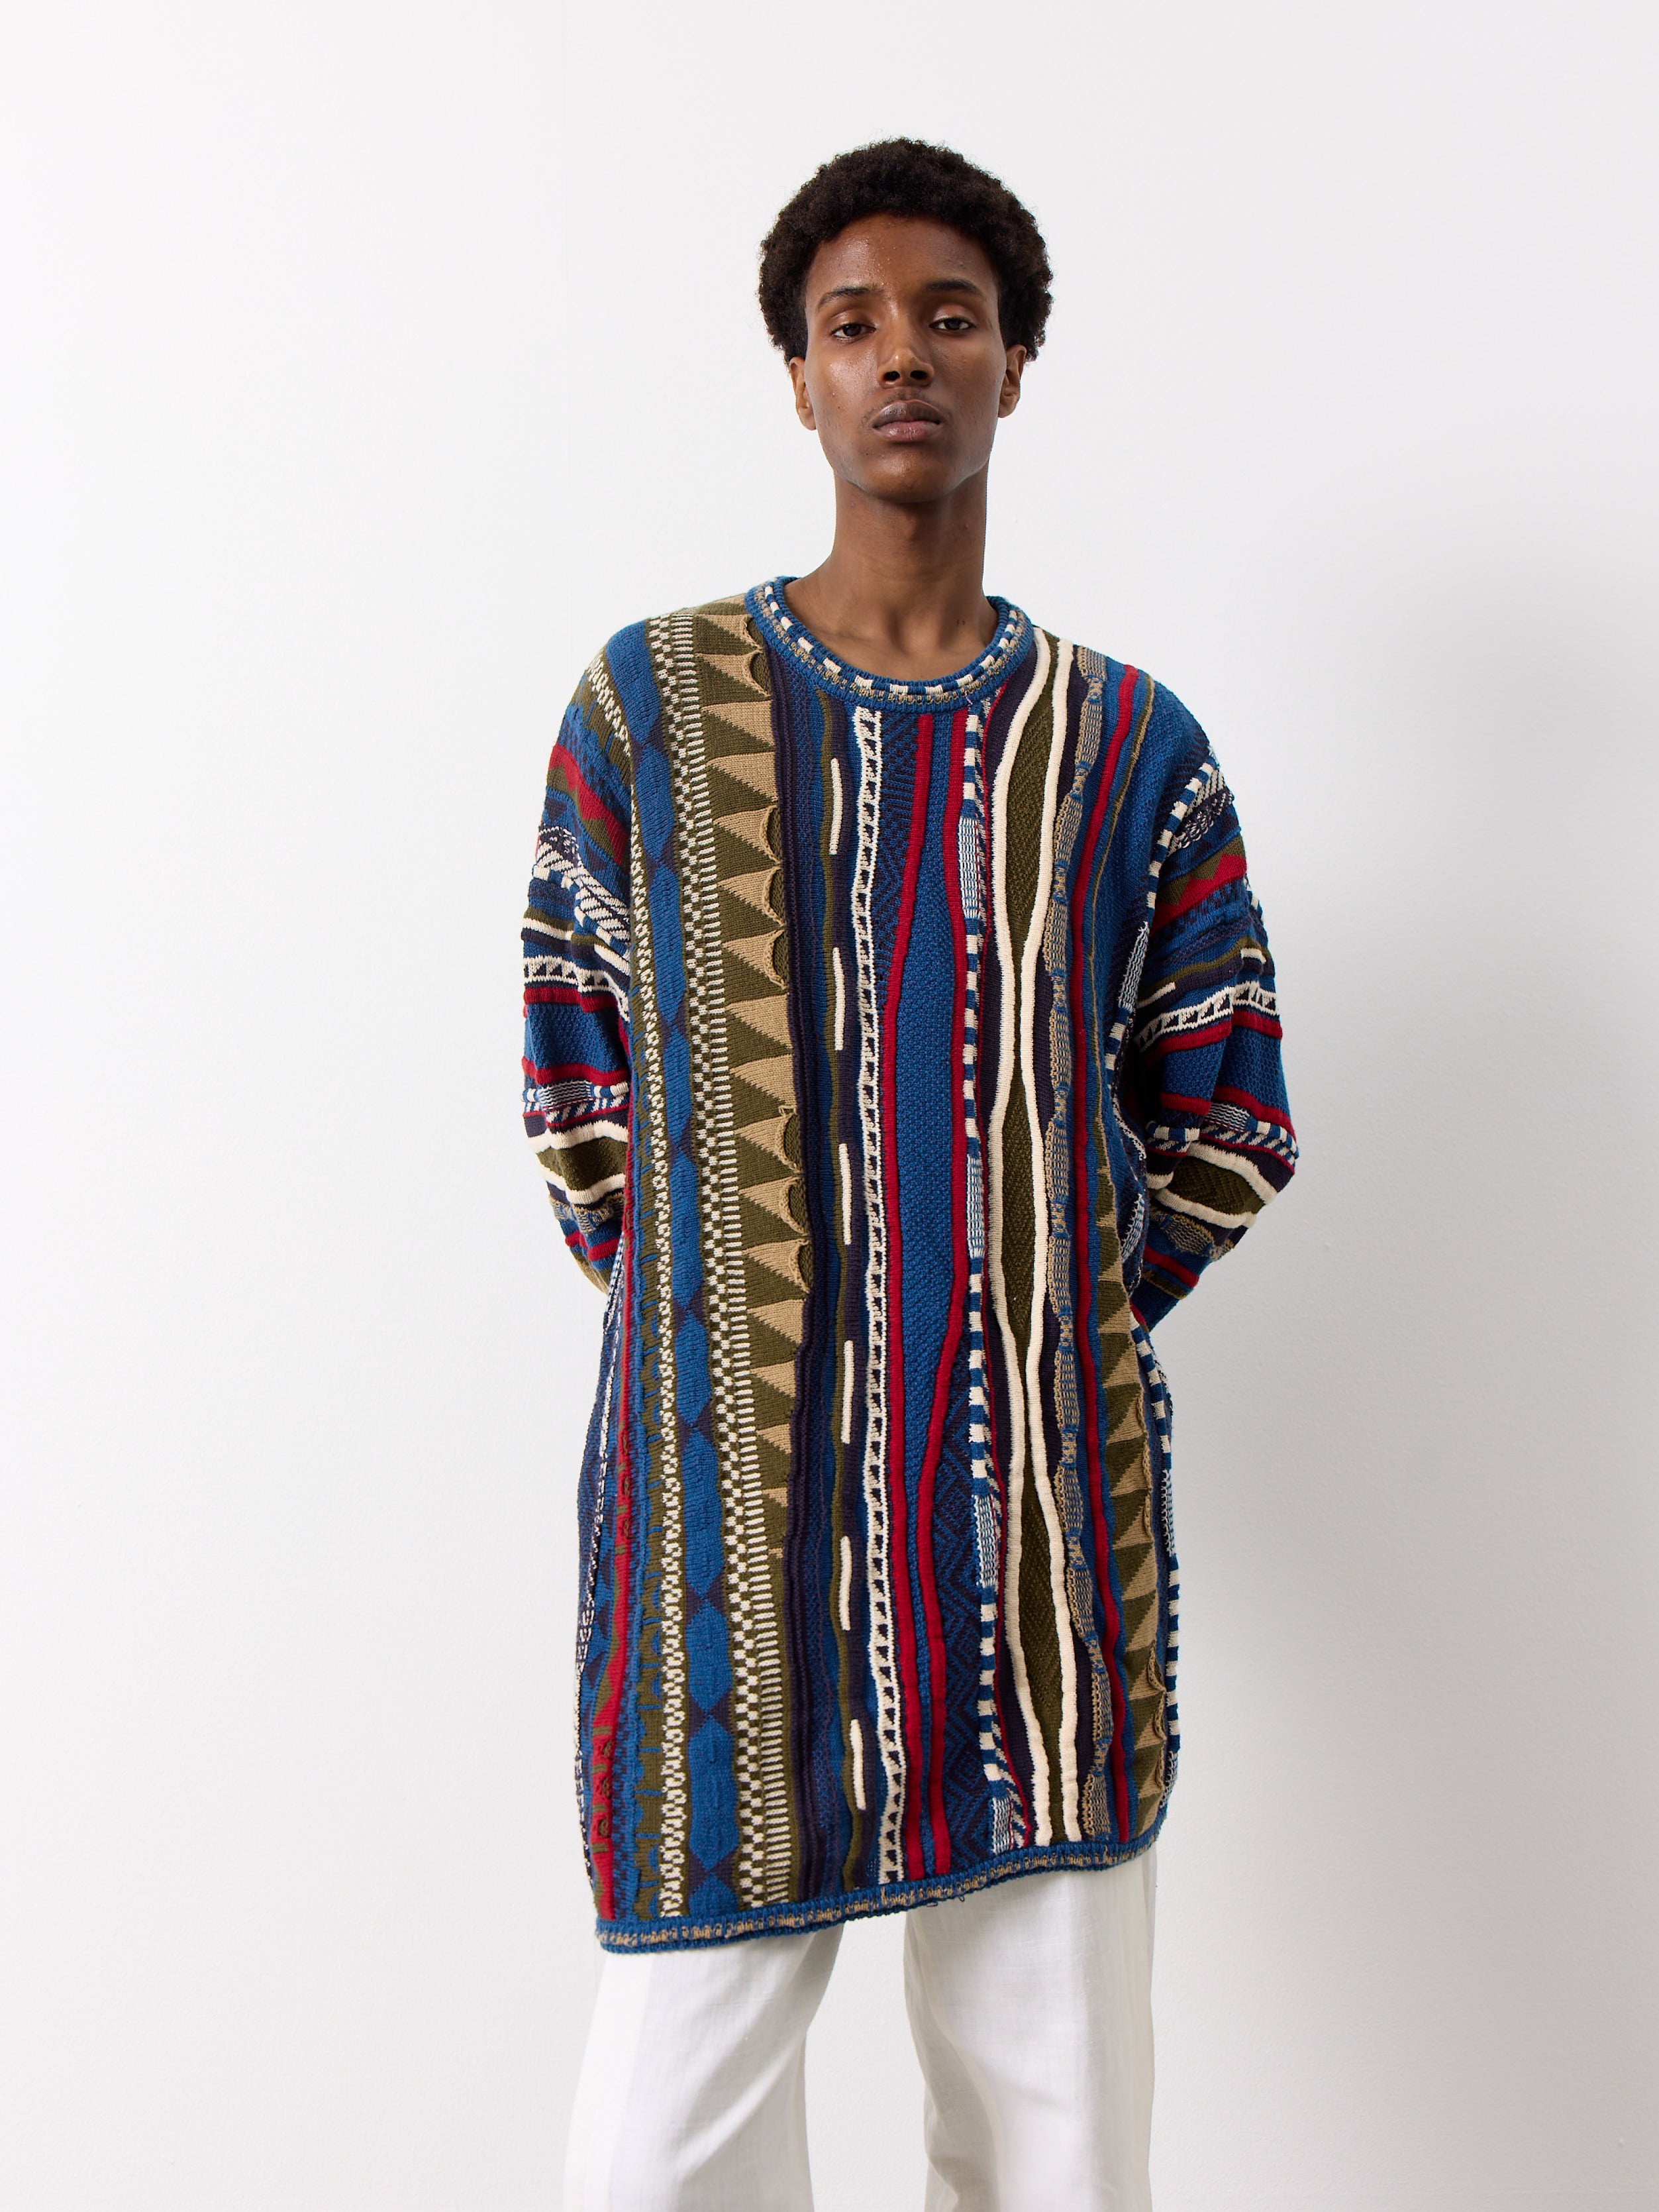 This three dimensional vintage knit sweater is uniquely inspired by Coogi, showcasing a bold design and vibrant colors.